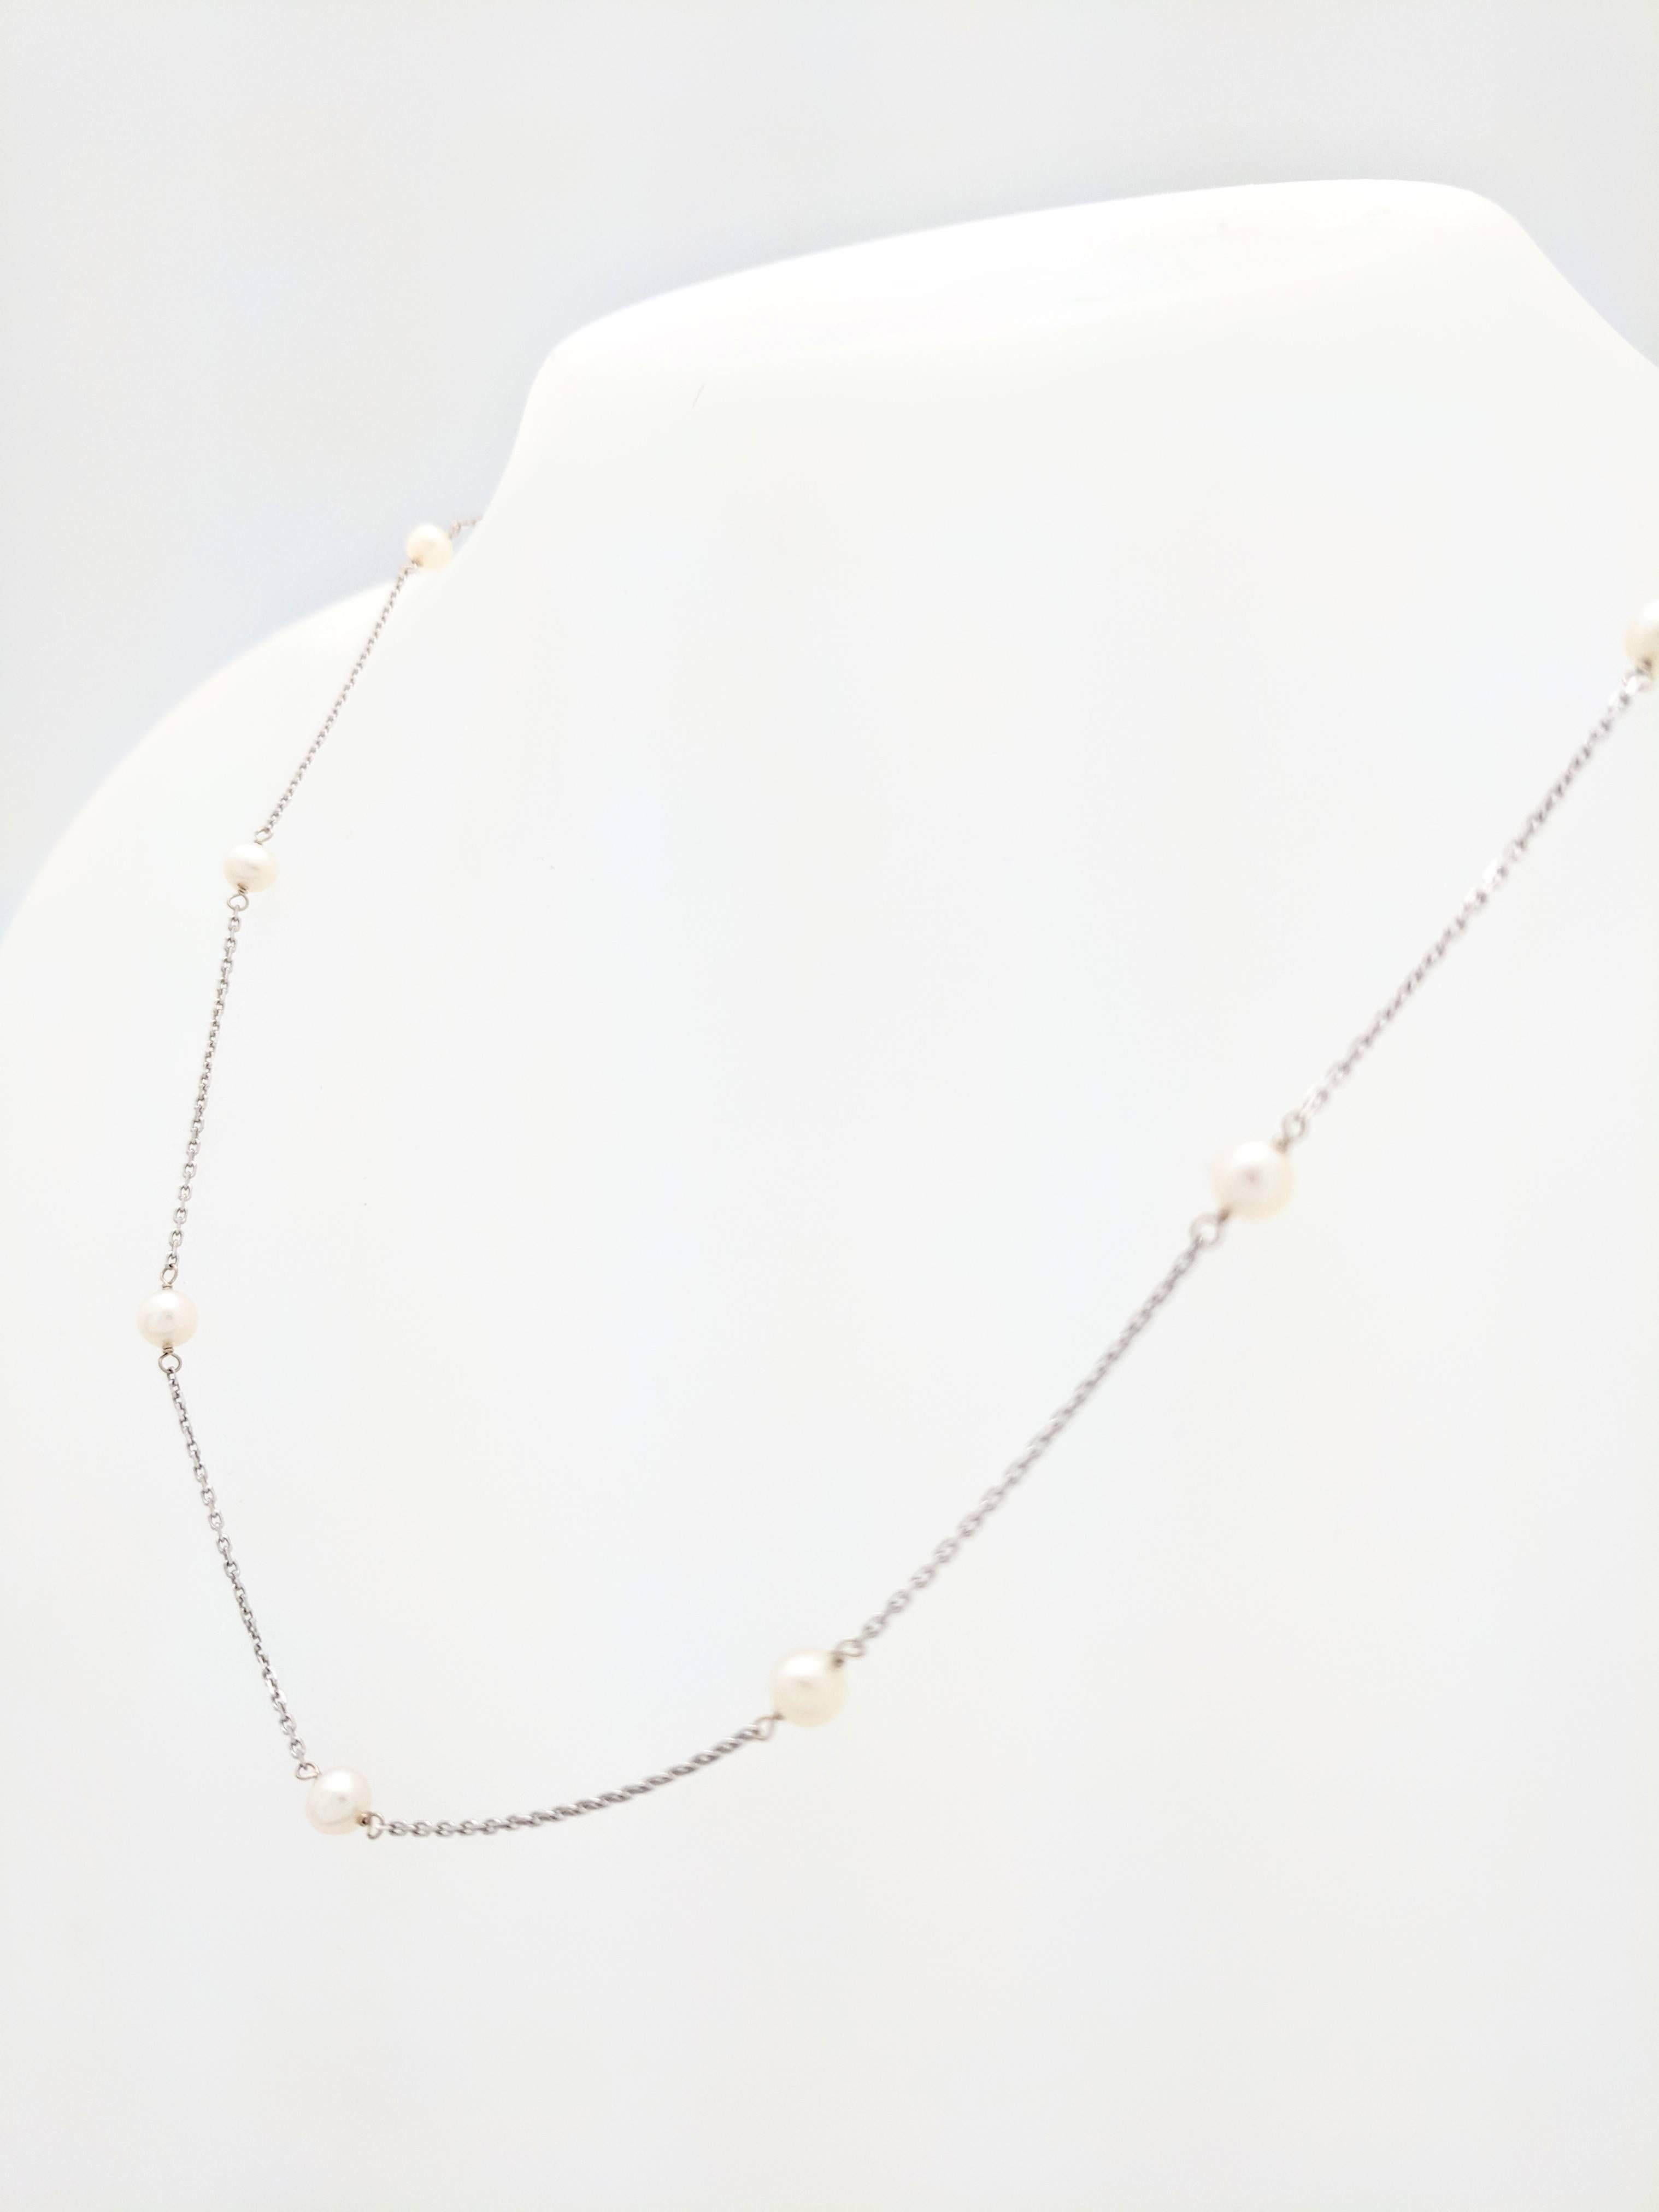 Contemporary 14 Karat White Gold Cultured Pearl Station Necklace